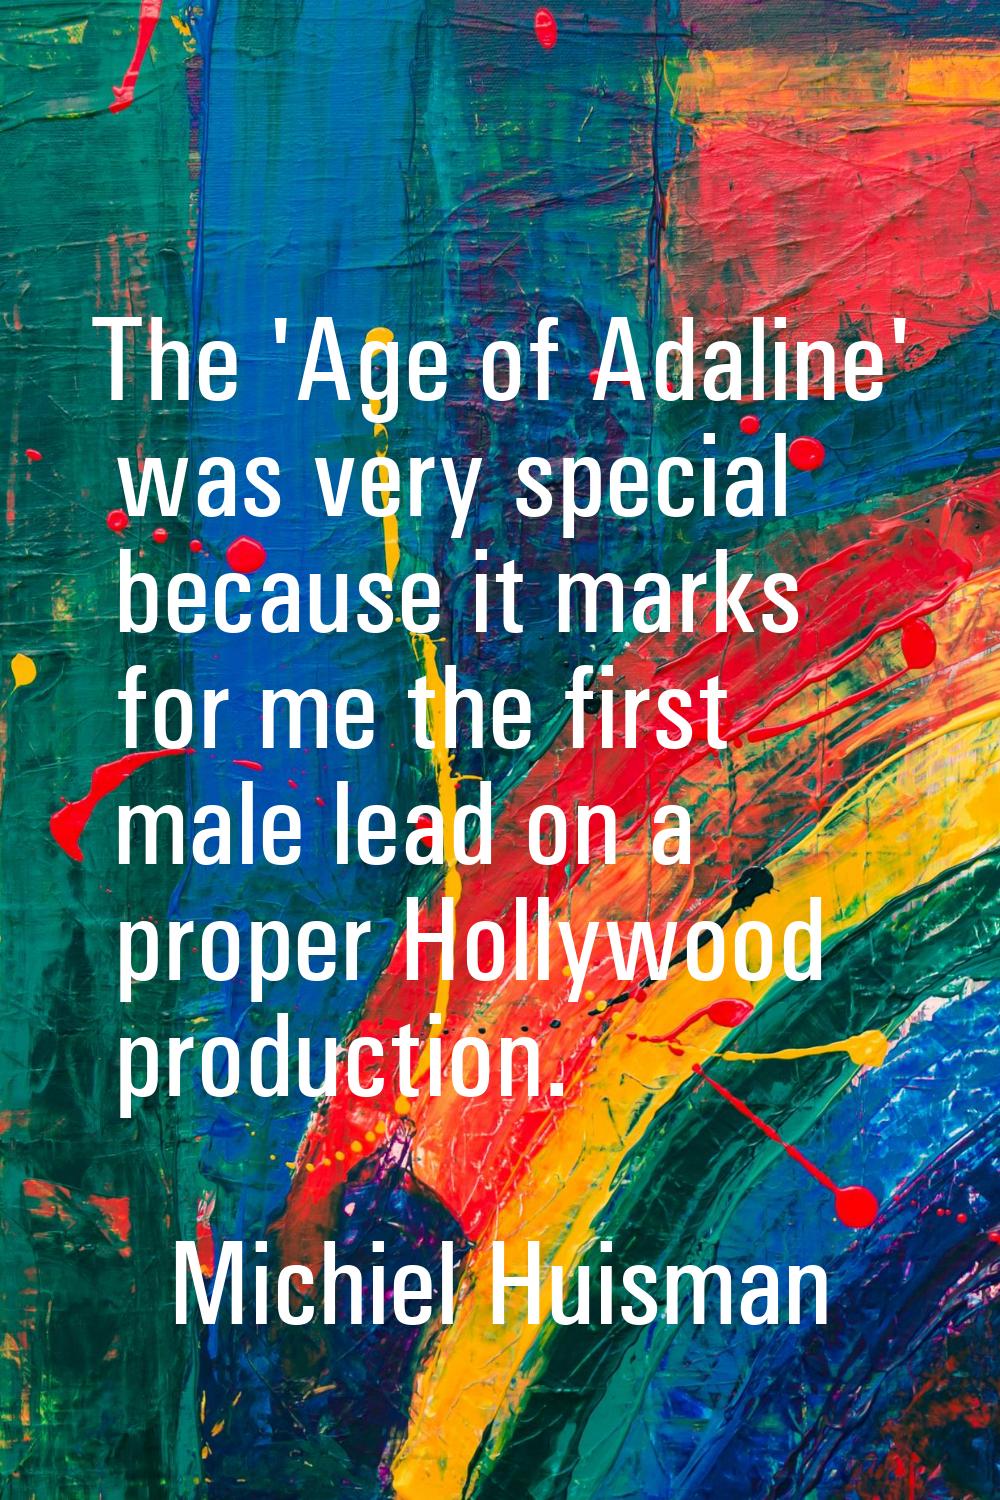 The 'Age of Adaline' was very special because it marks for me the first male lead on a proper Holly